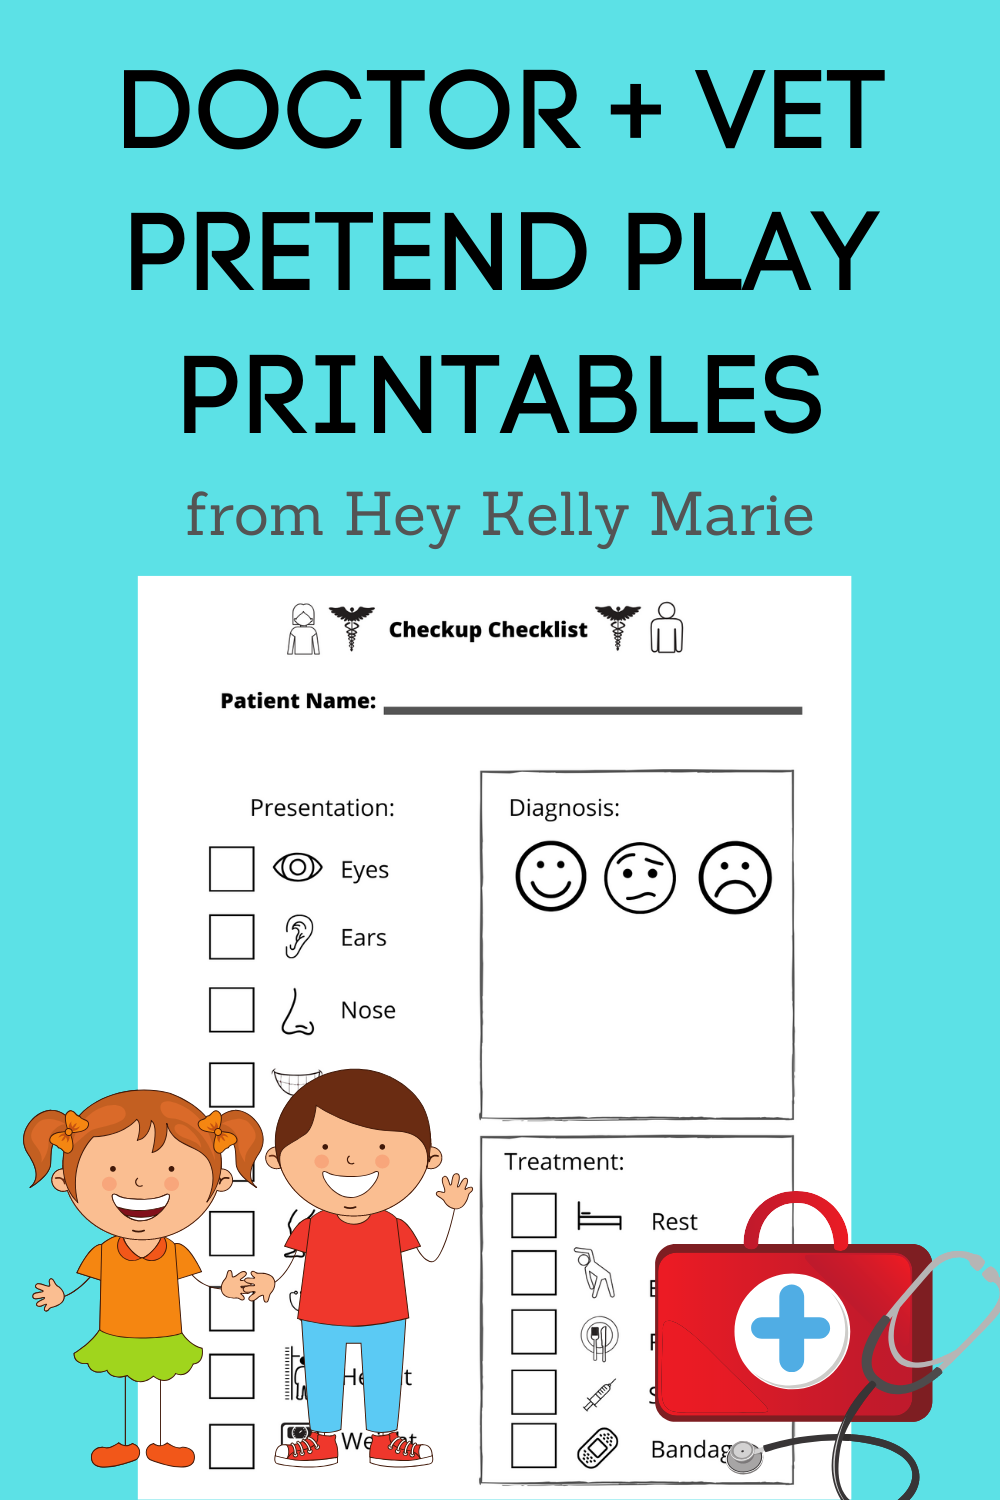 doctors-office-dramatic-play-free-printables-printable-templates